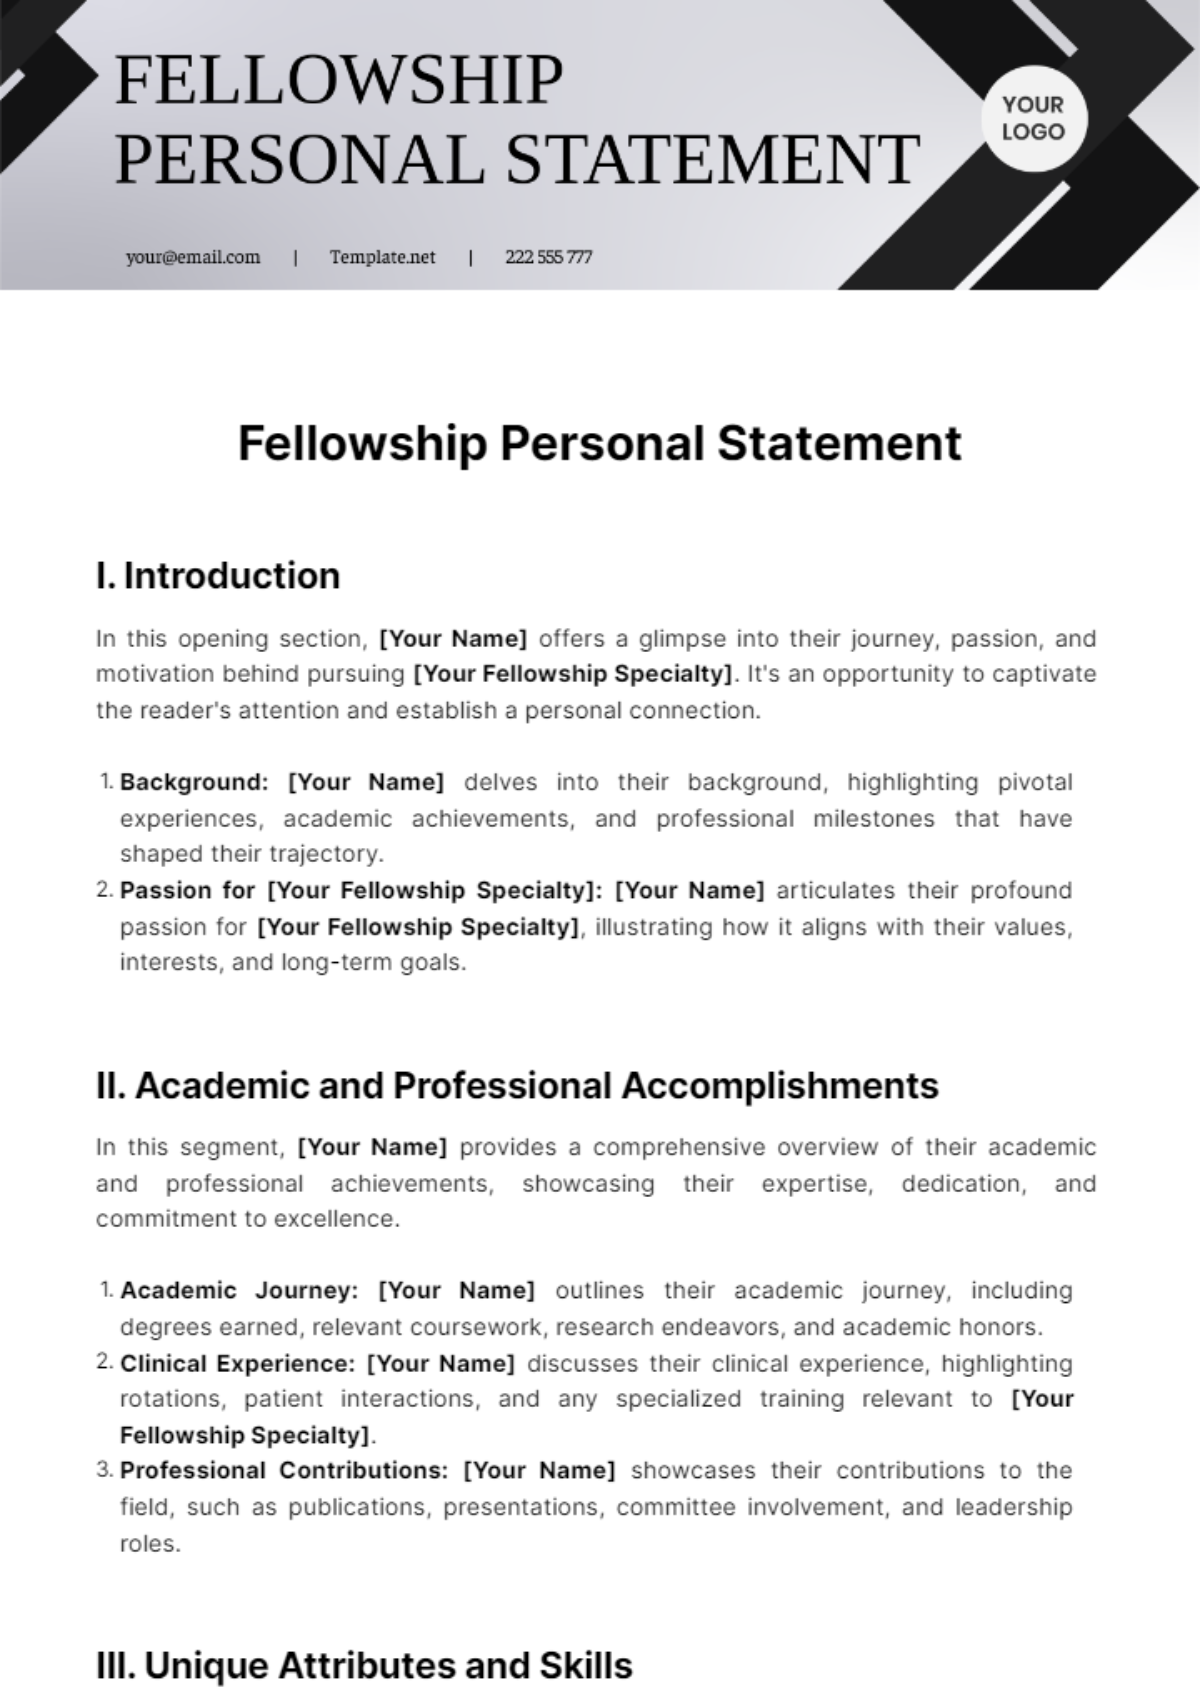 Fellowship Personal Statement Template